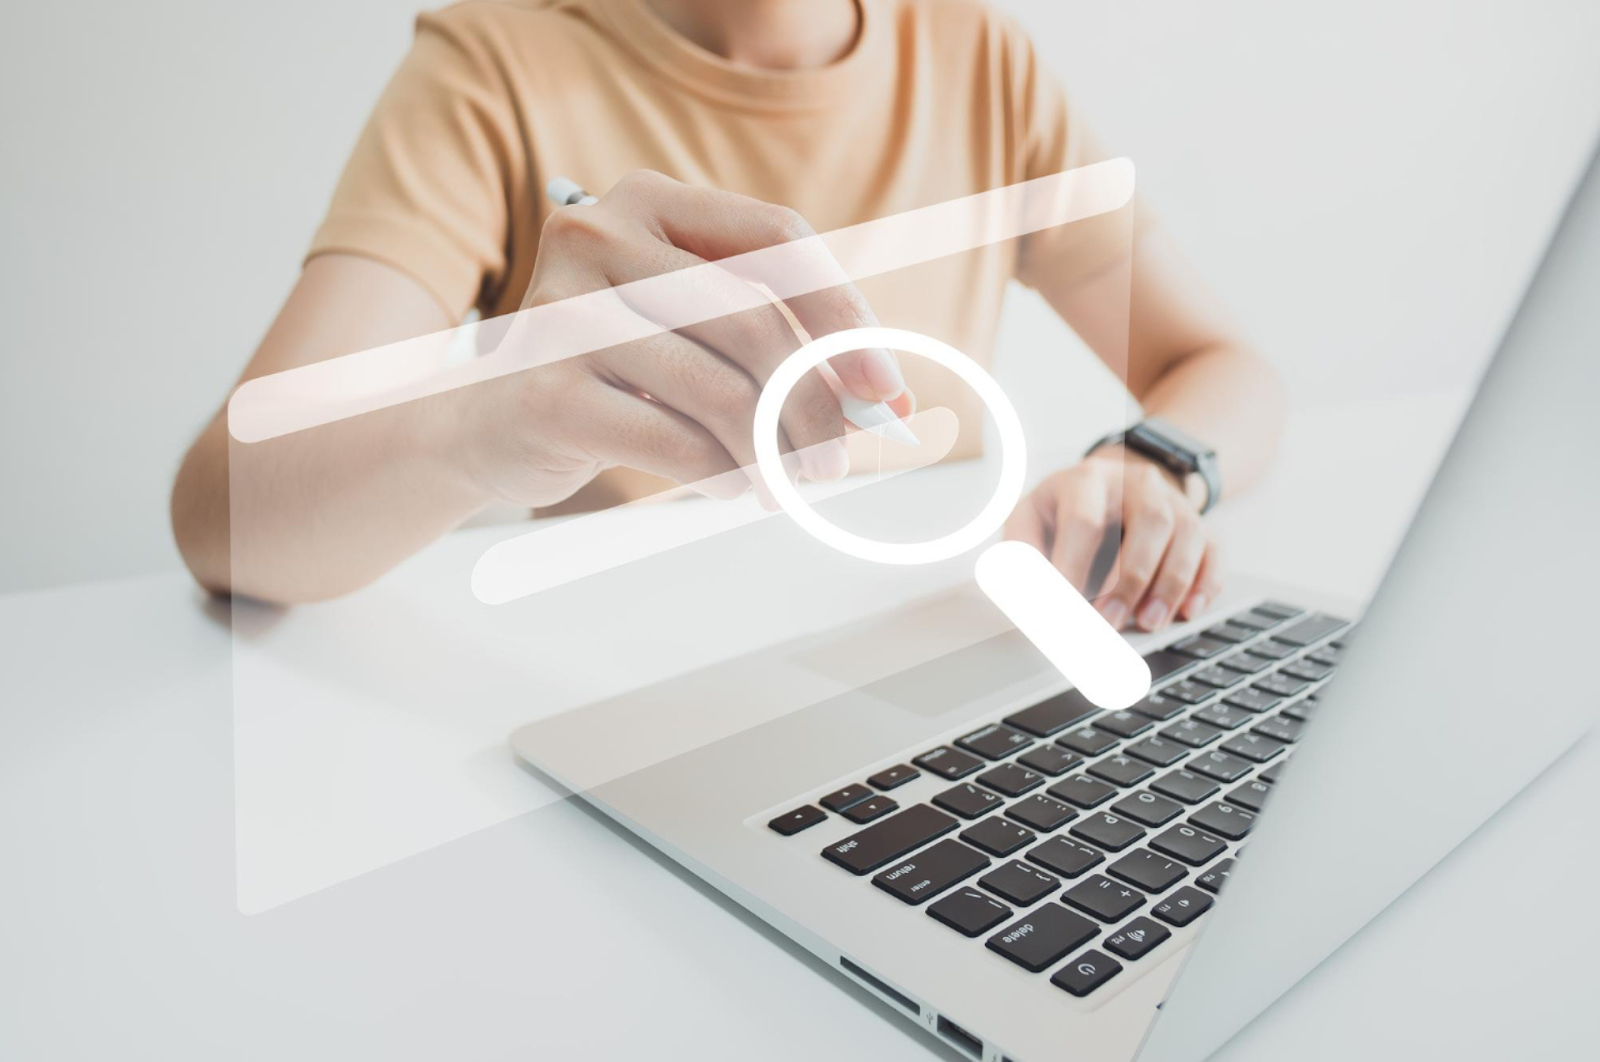 Conceptual image of a person using a magnifying glass over a search bar, representing the fine-tuning process of SEO on eCommerce.